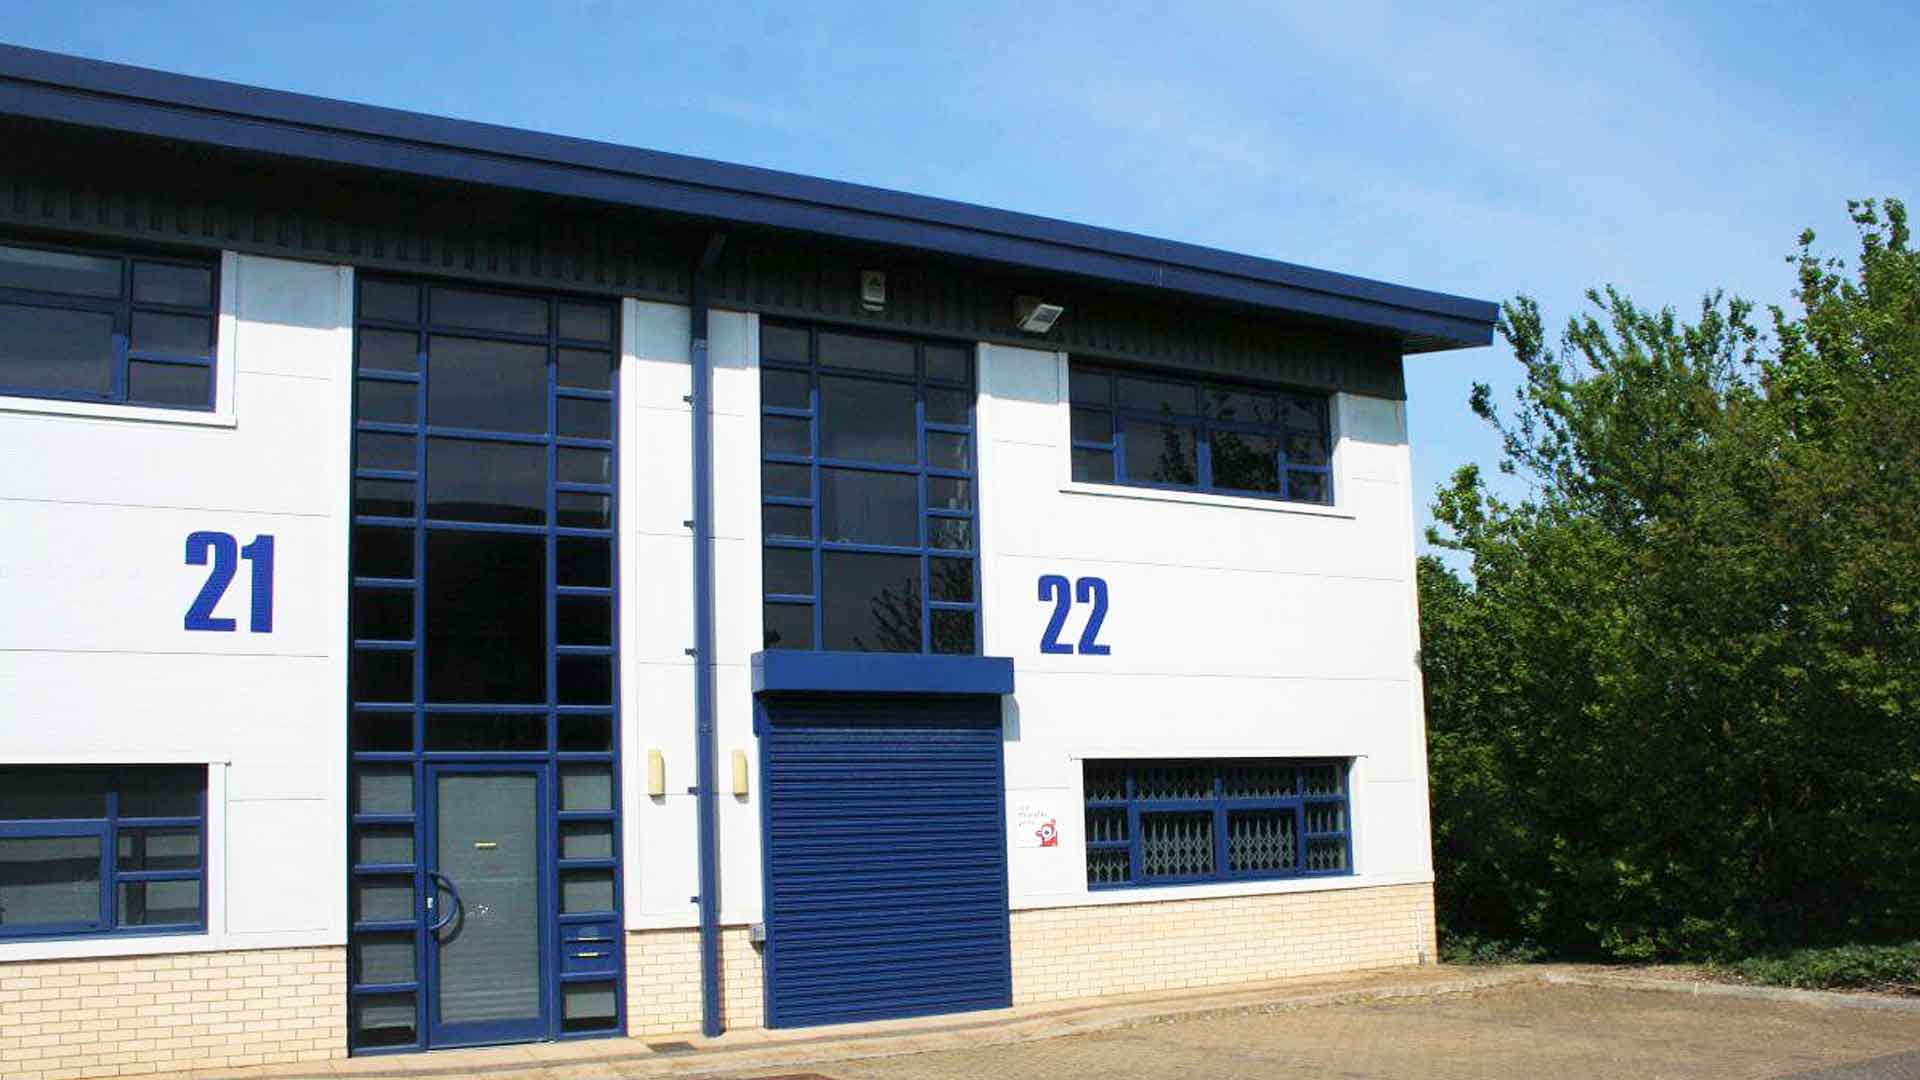 External view of two steel frame business units at Glenmore Business Park